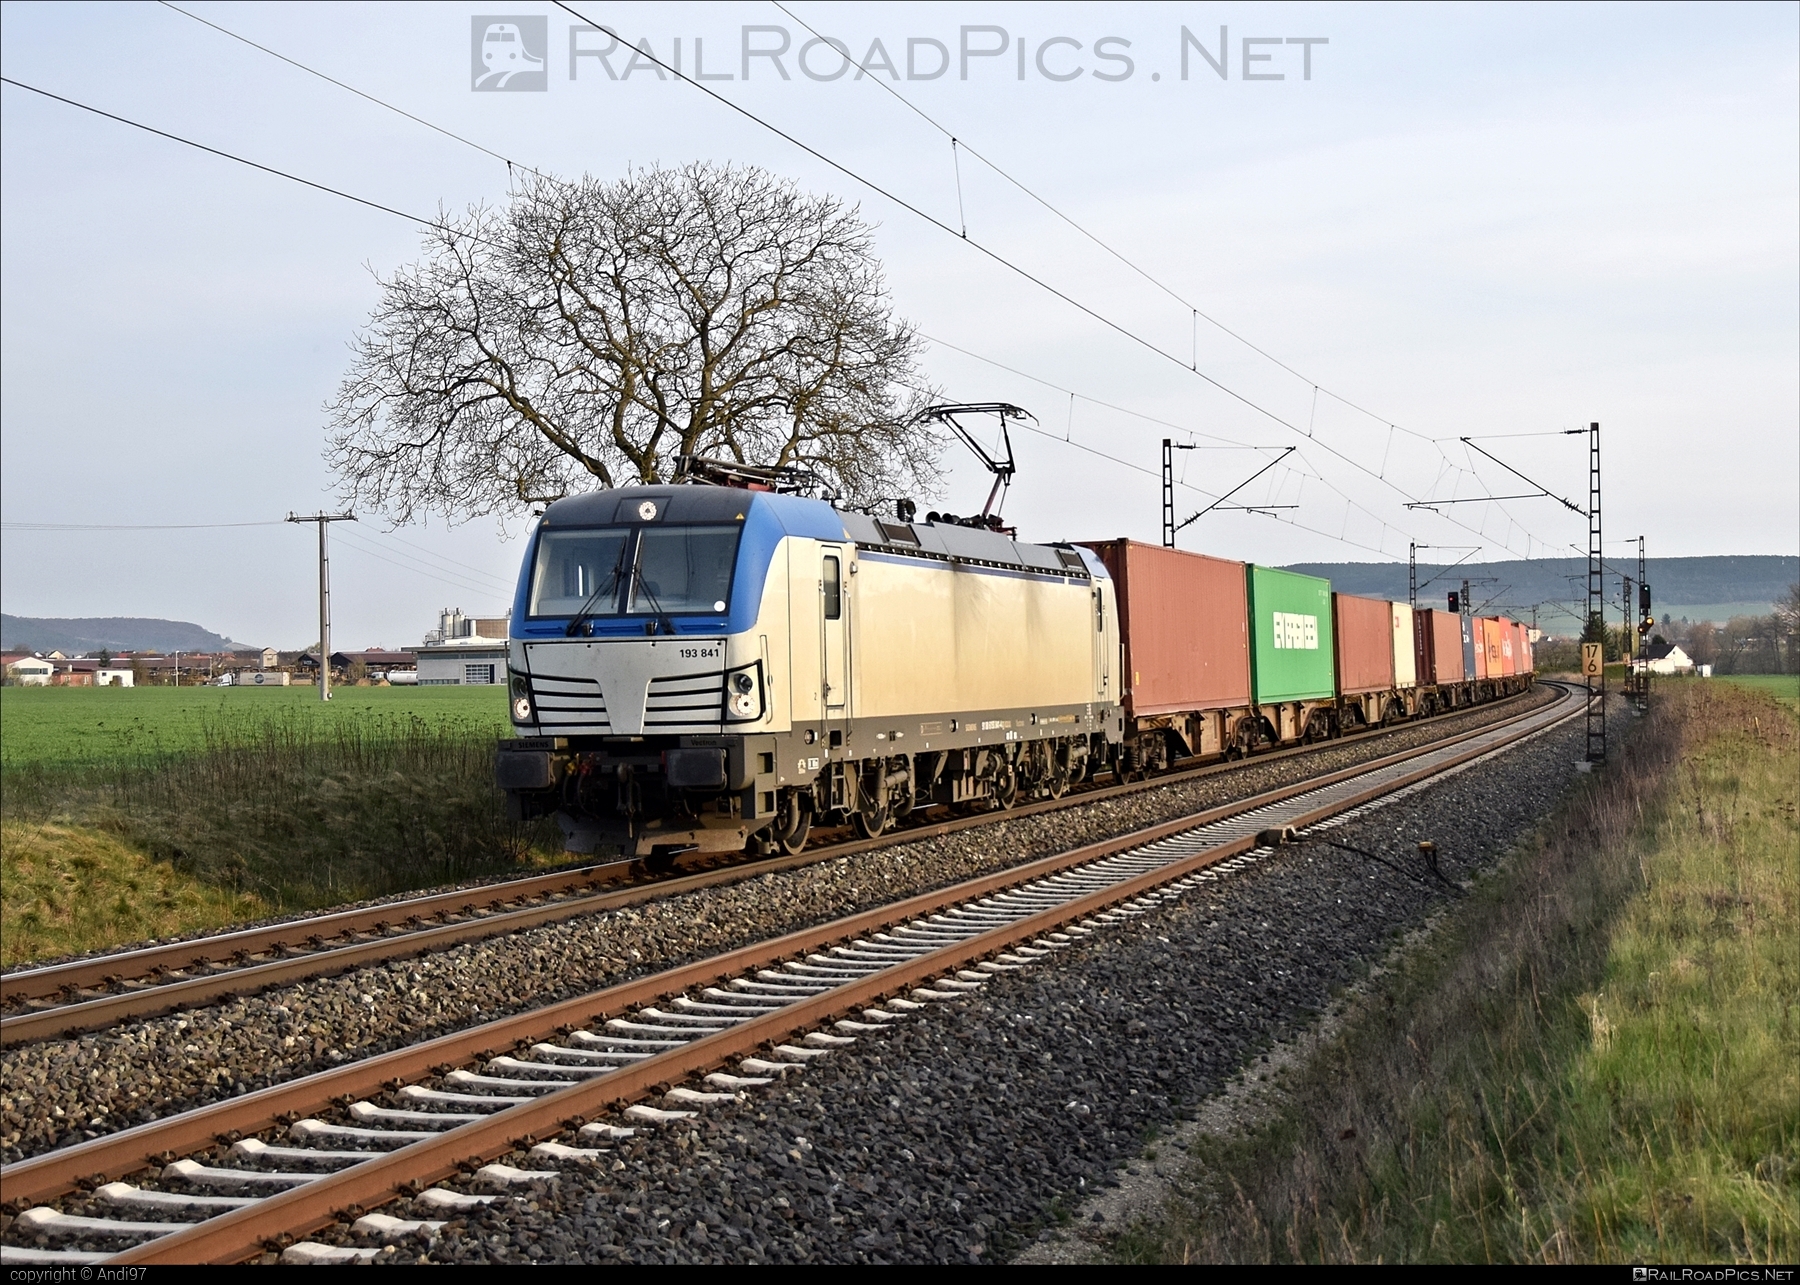 Siemens Vectron AC - 193 841 operated by BoxXpress.de GmbH #boxxpress #container #flatwagon #siemens #siemensVectron #siemensVectronAC #vectron #vectronAC